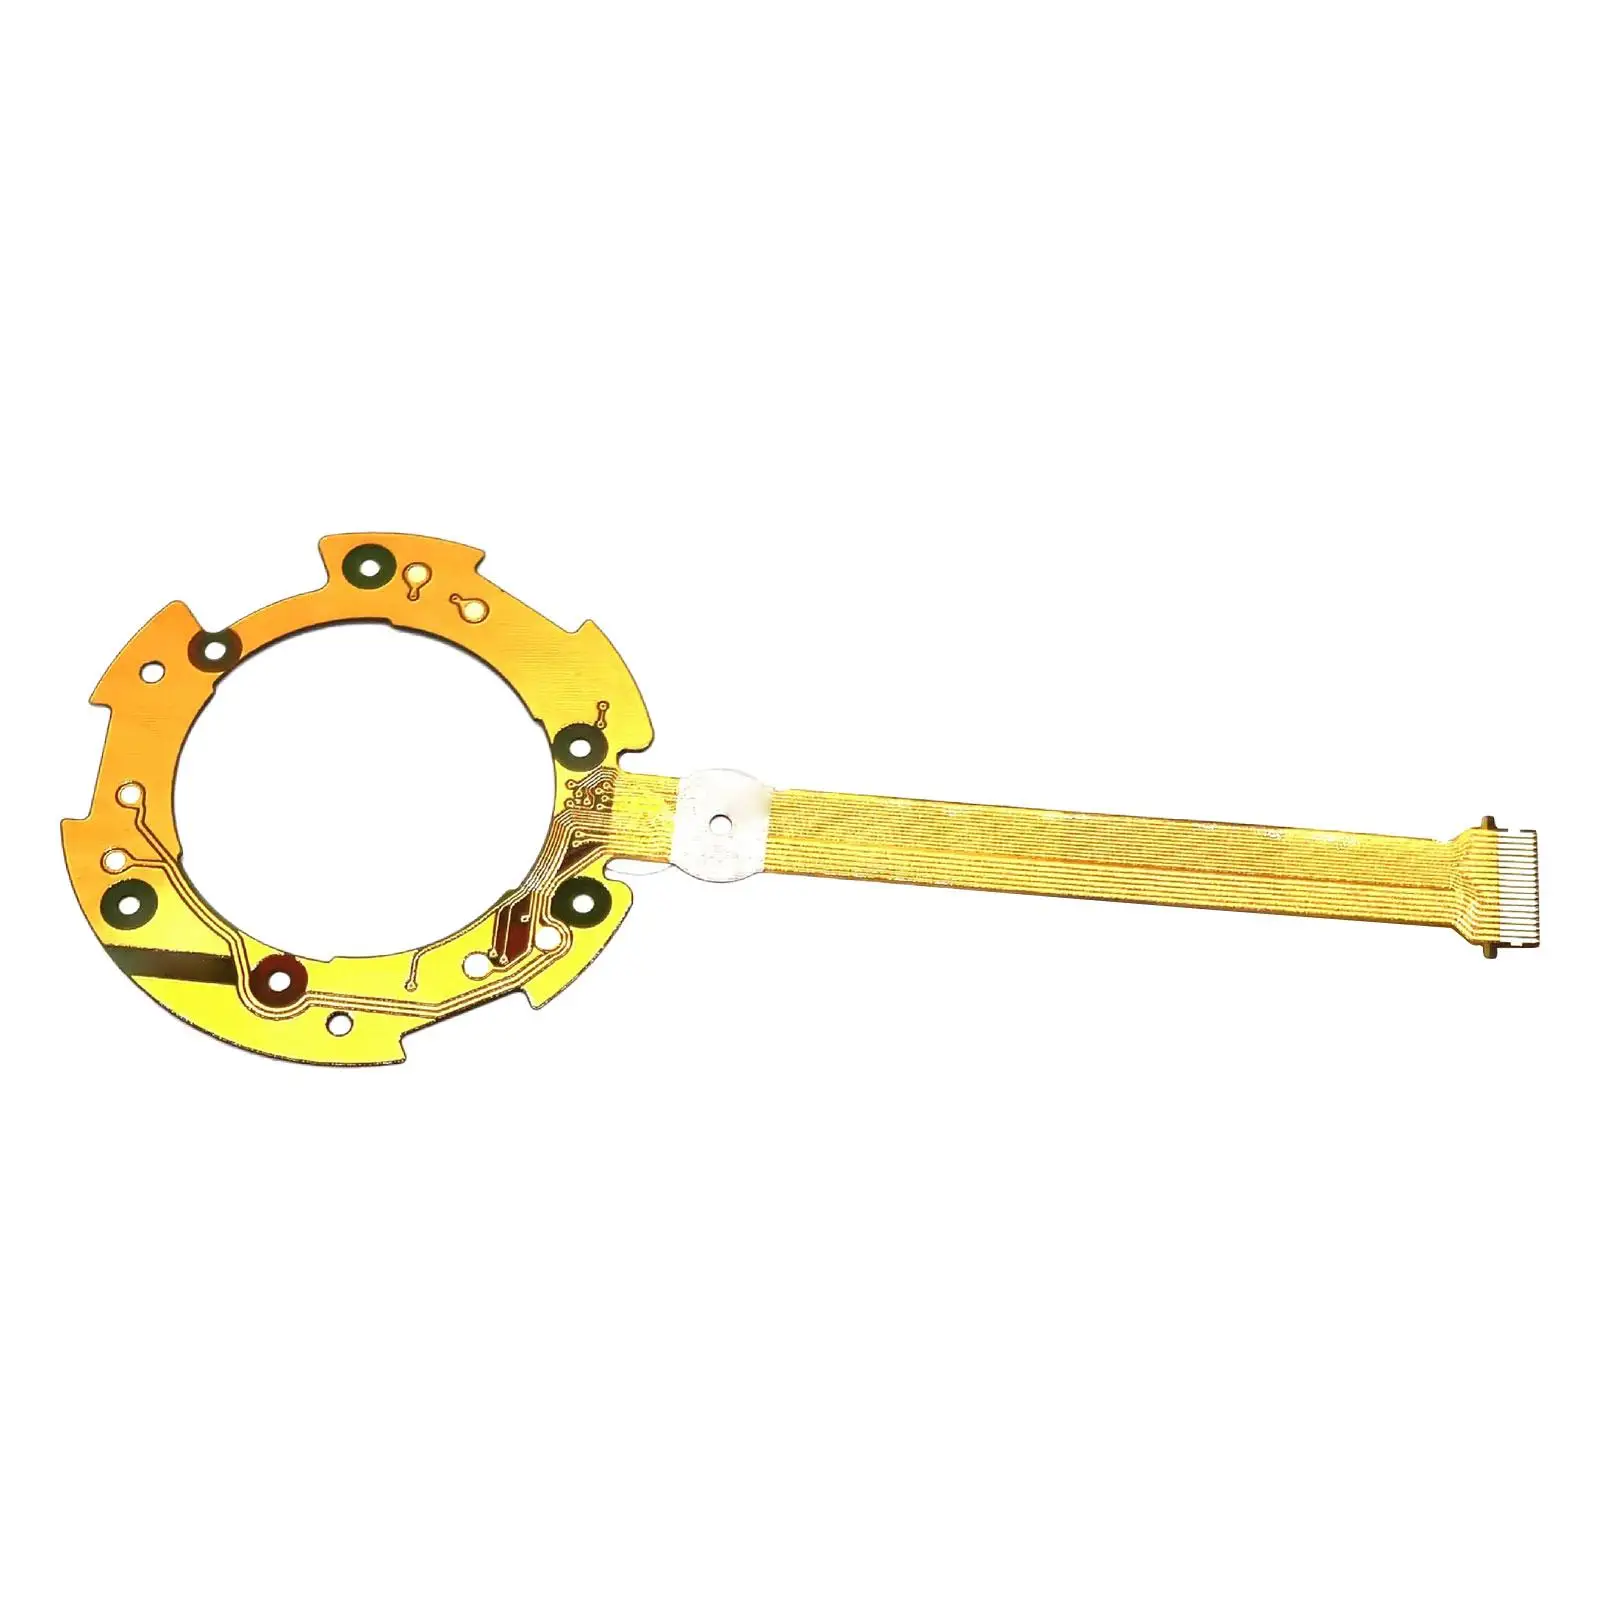 Lens Anti SHAKE Flex Cable High Quality Replace Parts for 24-105mm F4 DG OS Hsm Art Camera Repair Part Accessory